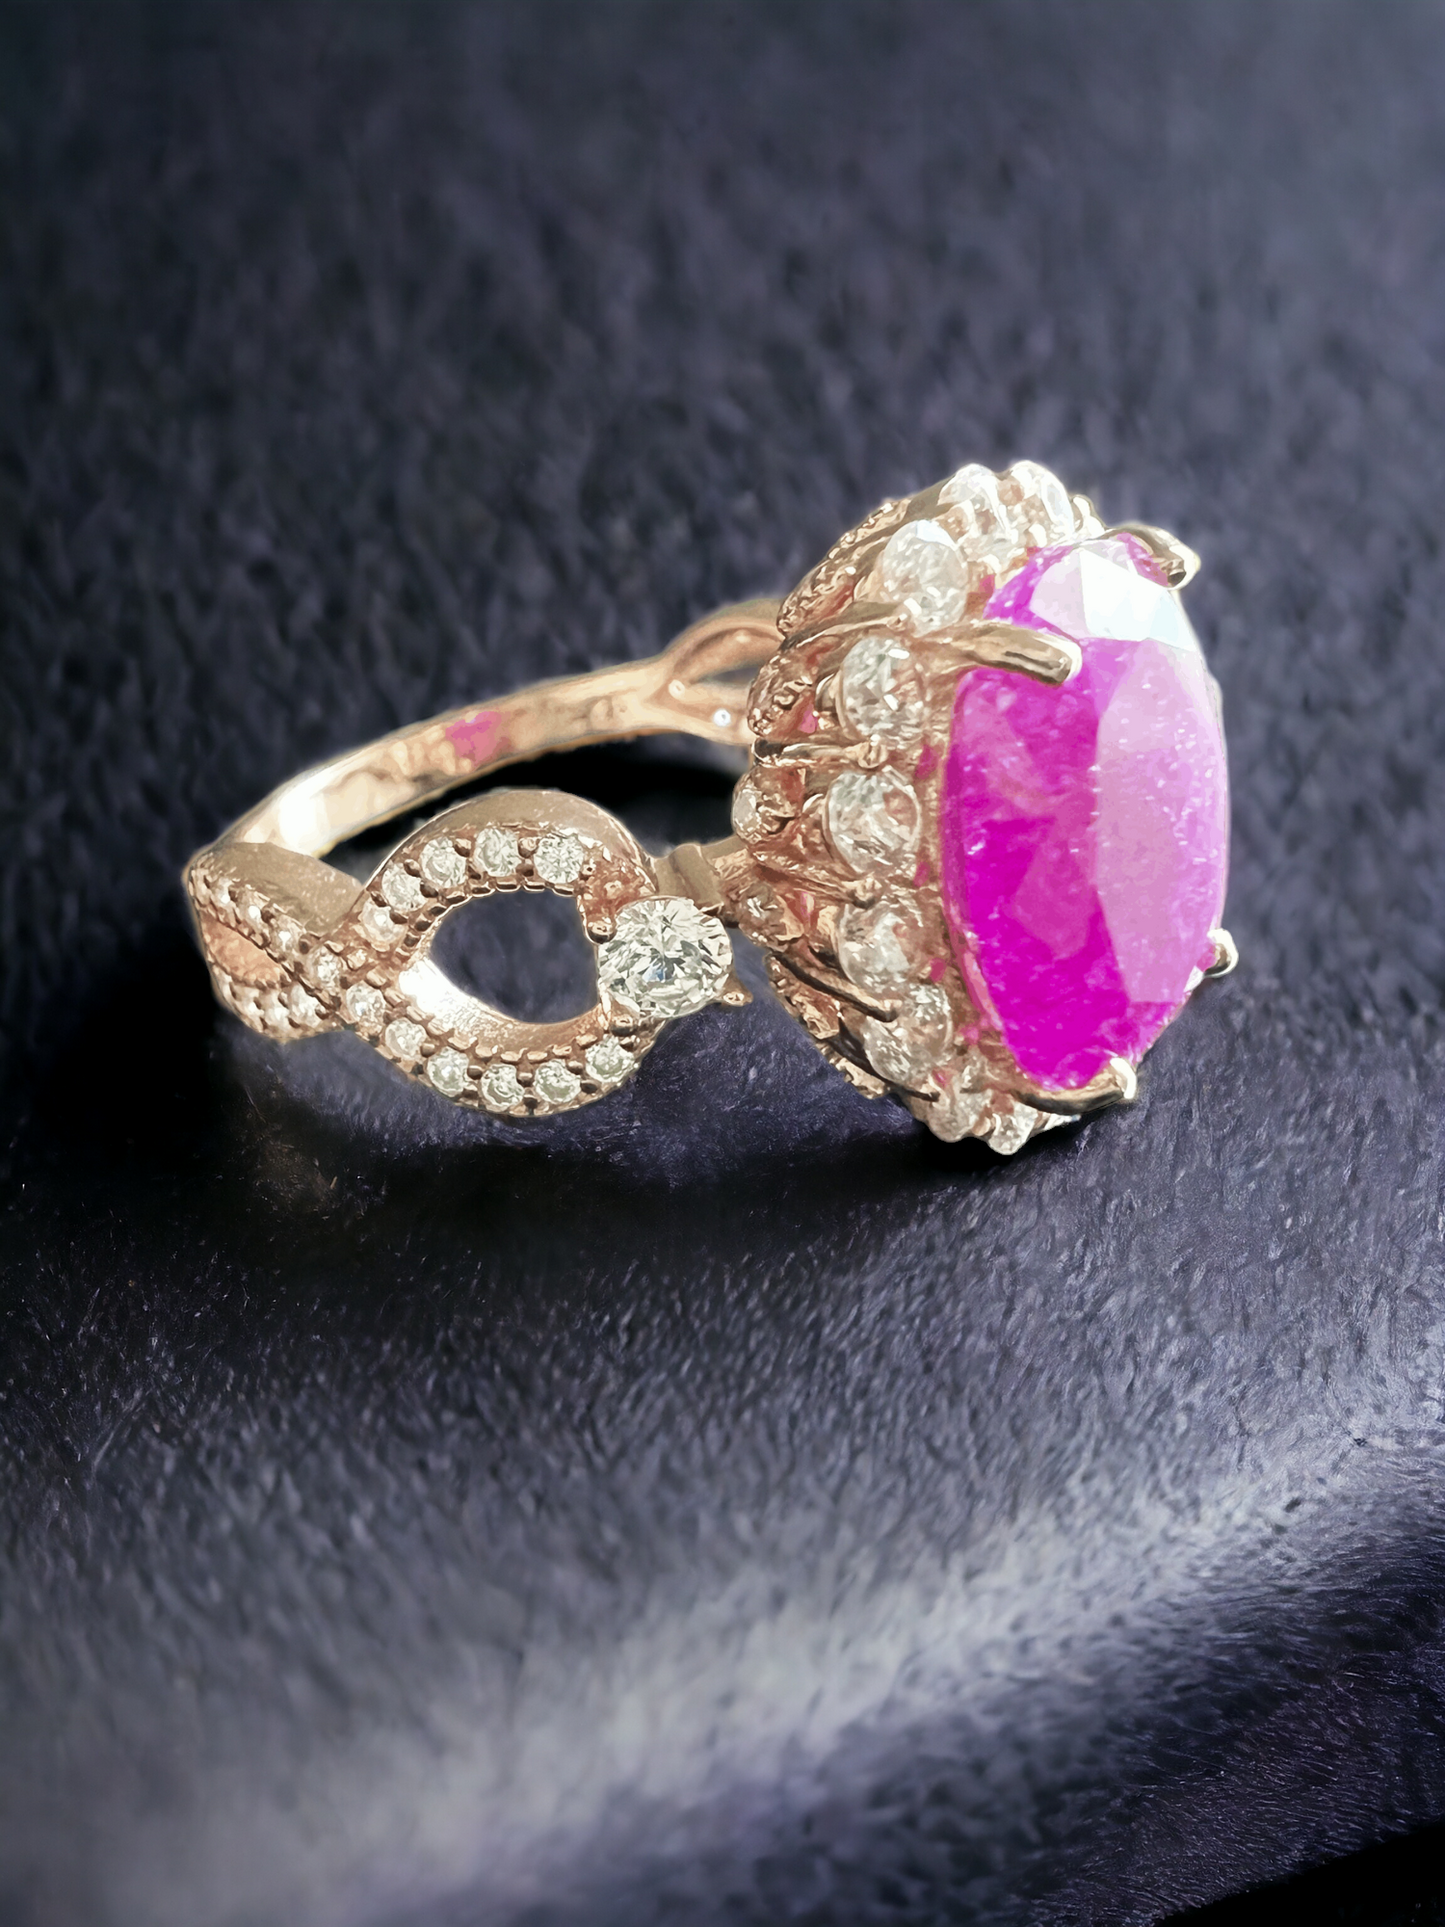 *PRE-ORDER - 925 Sterling Silver Infinity Oval Cut Hot Pink Ice & Diamond CZ Ring on Rose Gold